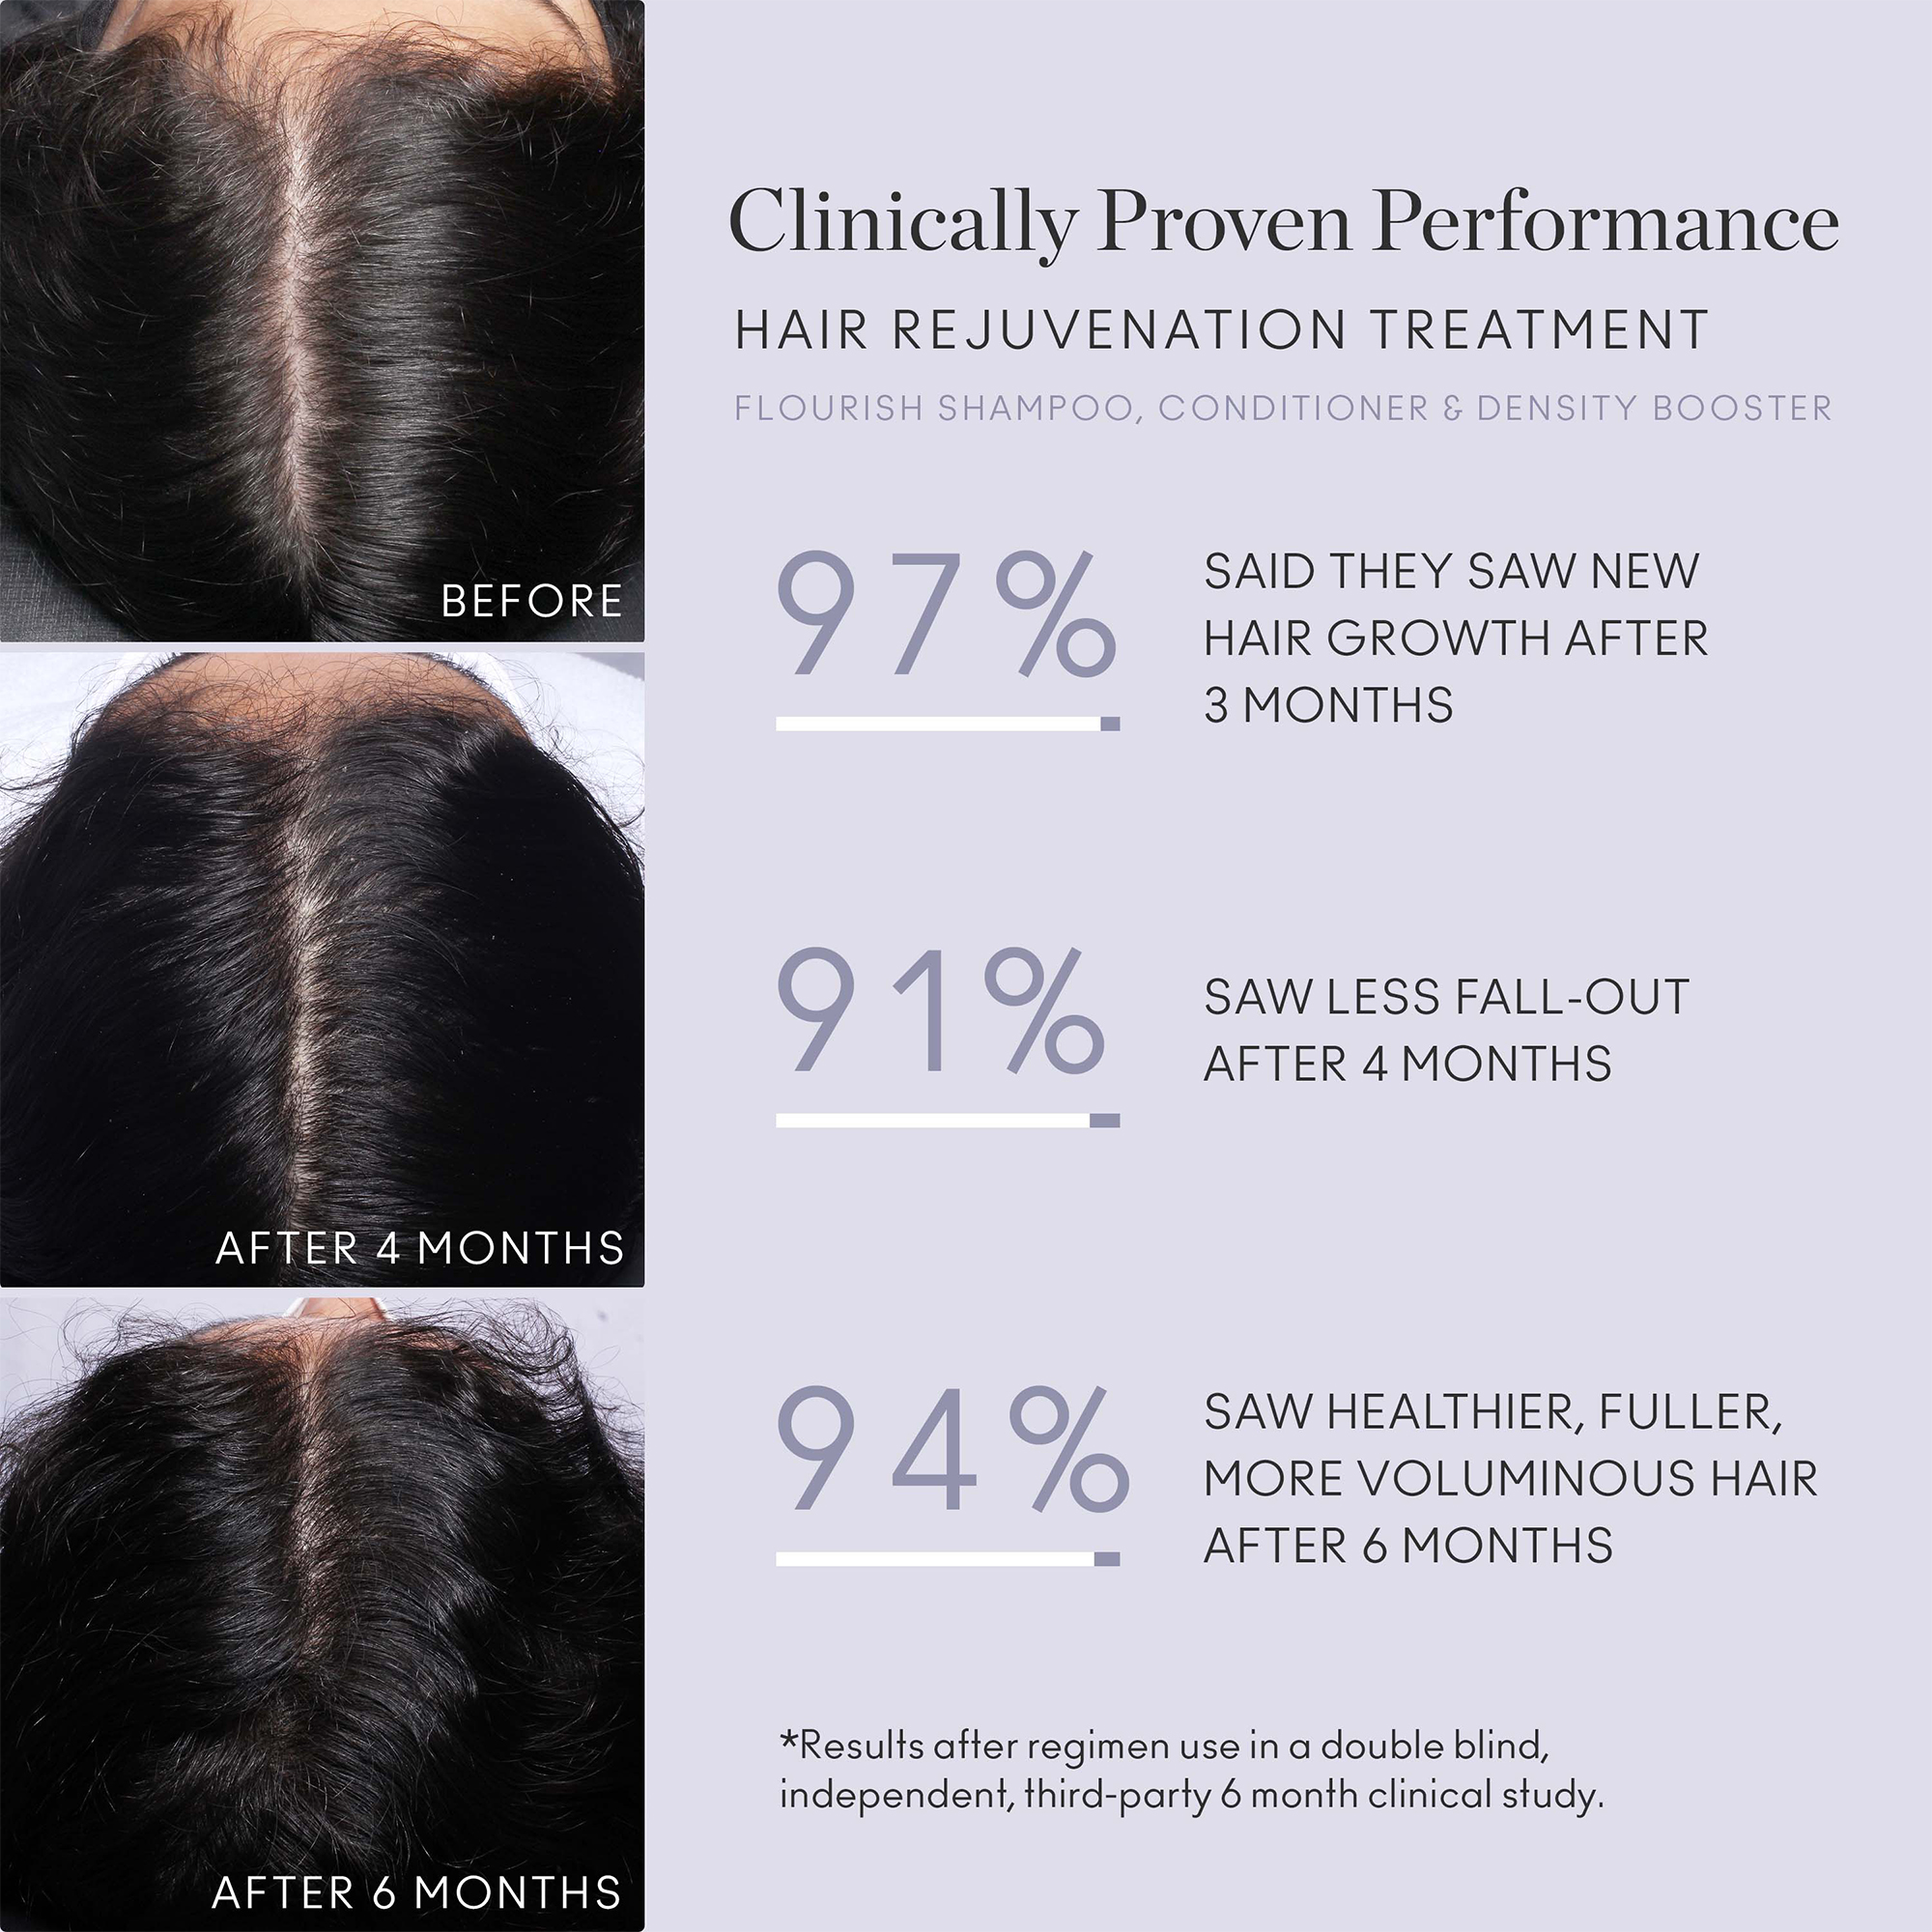 Clinically proven performance hair rejuvenation treatment floruish shampoo and density booster 97% said they saw new hair growth after 3 months 91% saw less fall-out after 4 months, 94% saw healthier, fuller, more voluminous hair after 6 months - results after a regimen use in a double blind independent third party 6 month clinical study